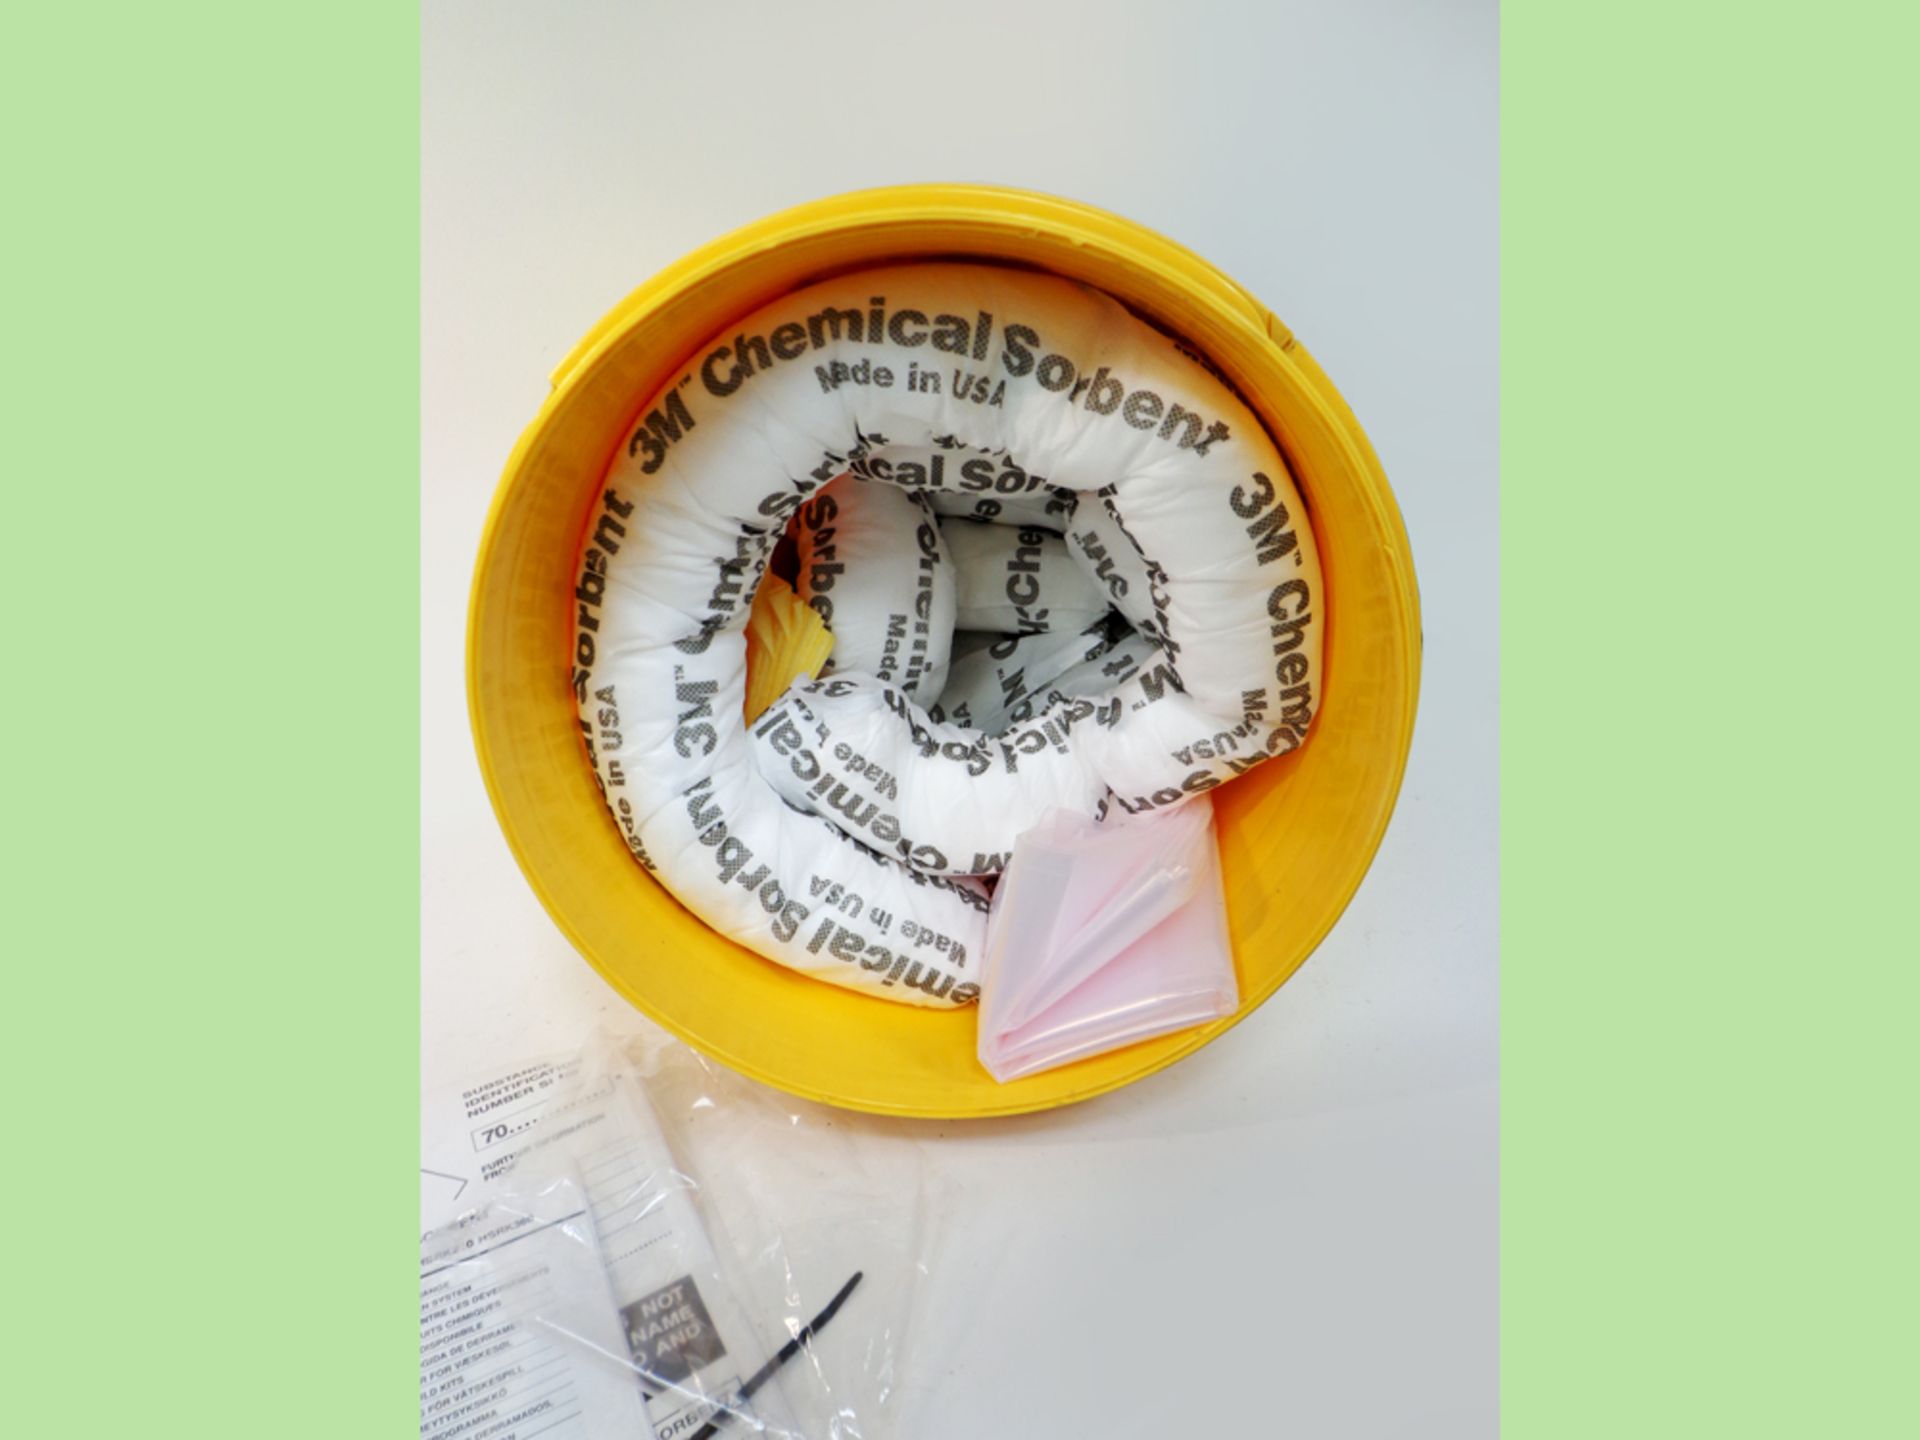 3M SK 26 Chemical Spill Control Kit for Absorption of Hazardous Liquids. - Image 8 of 8